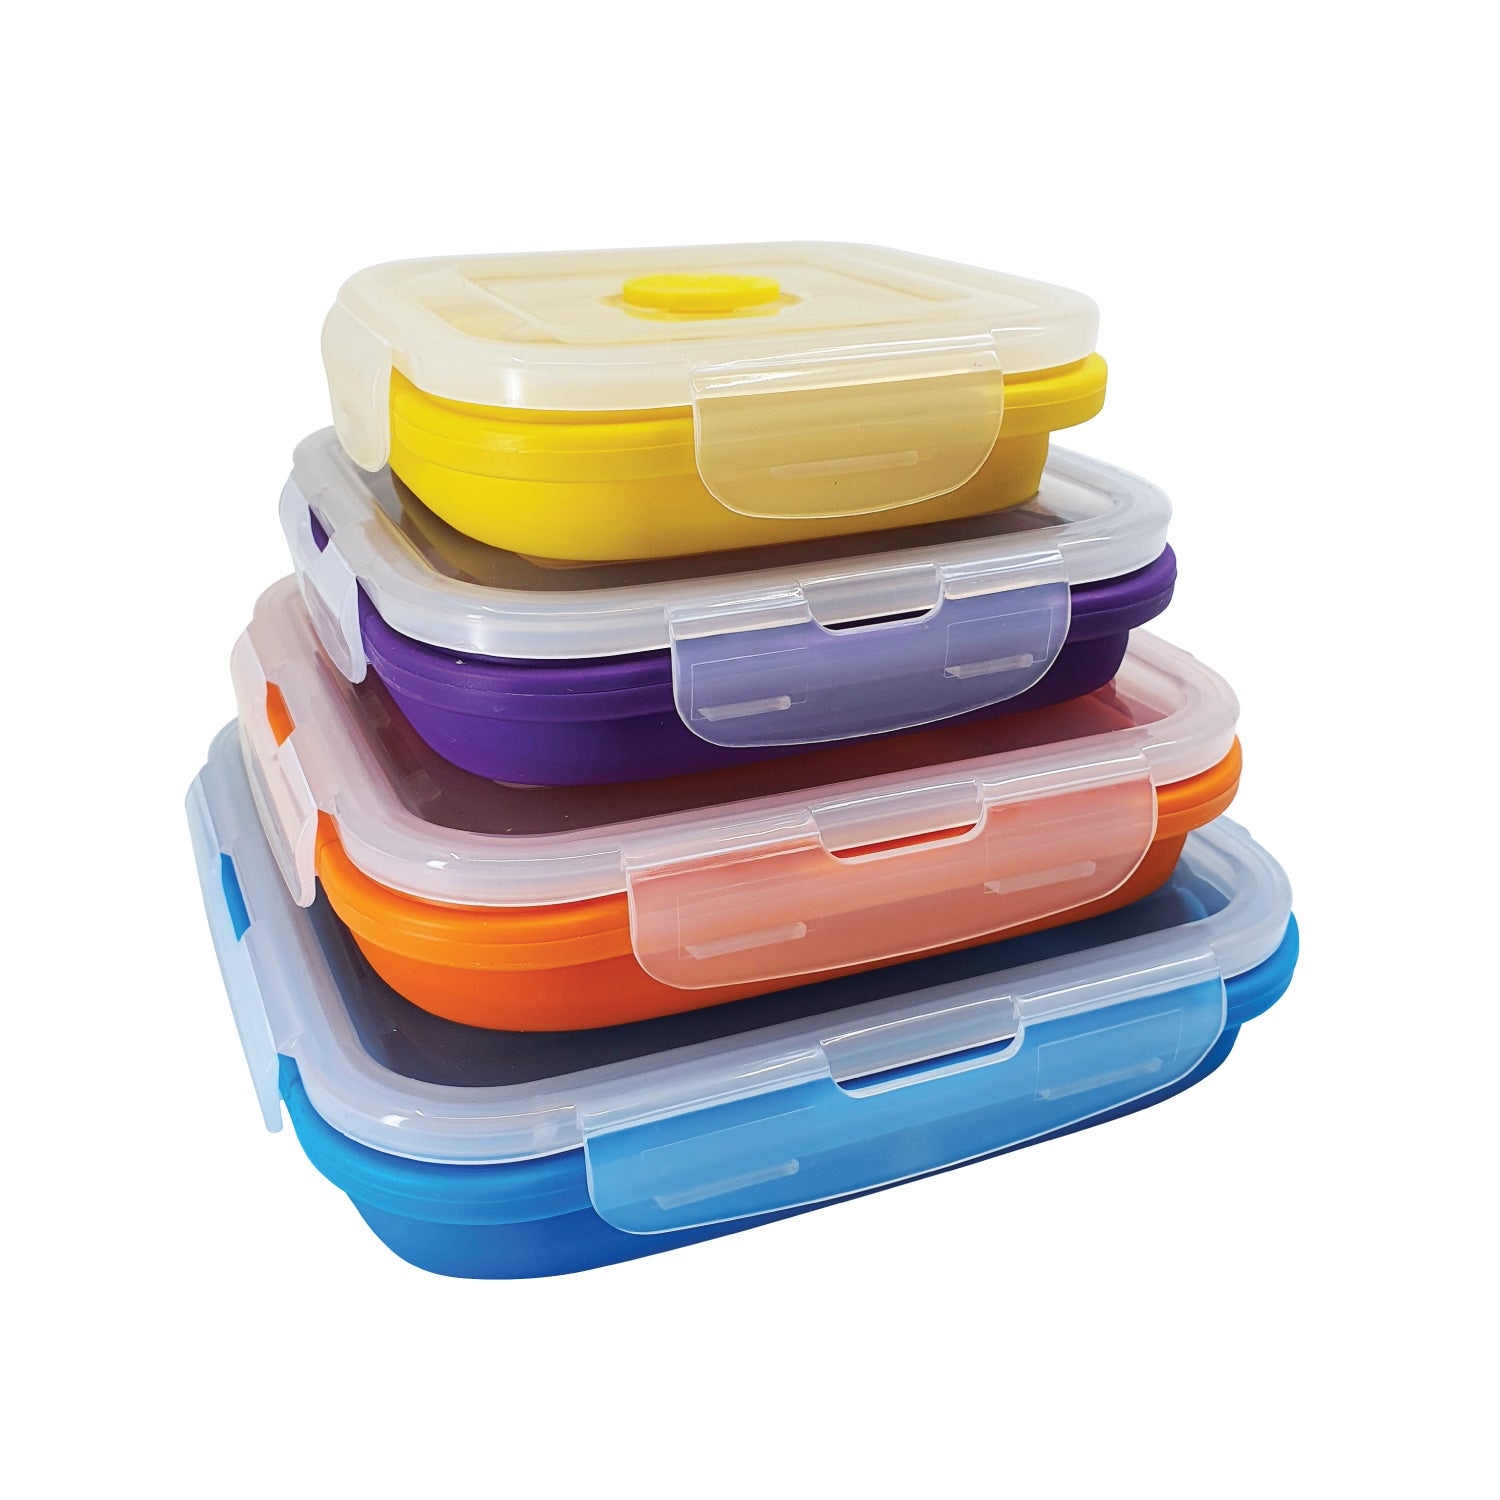 Food Storage Container, flat storage bins with lids, Stackable